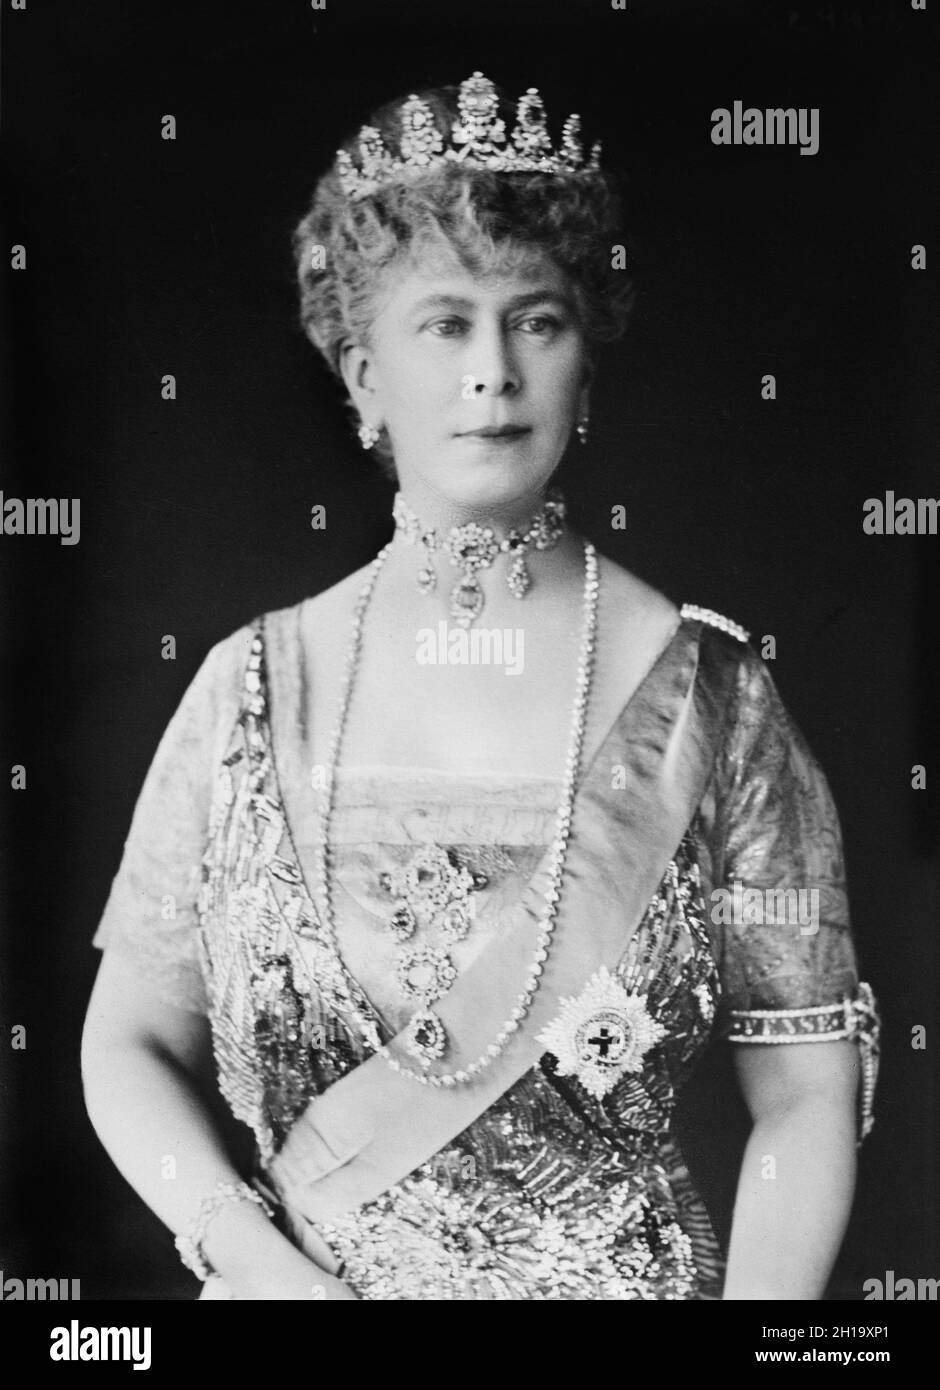 Mary of Teck (1867-1953), Queen of United Kingdom and British Dominions 1910-1936 as wife of King George V, half-length Portrait, Bain News Service, 1920 Stock Photo